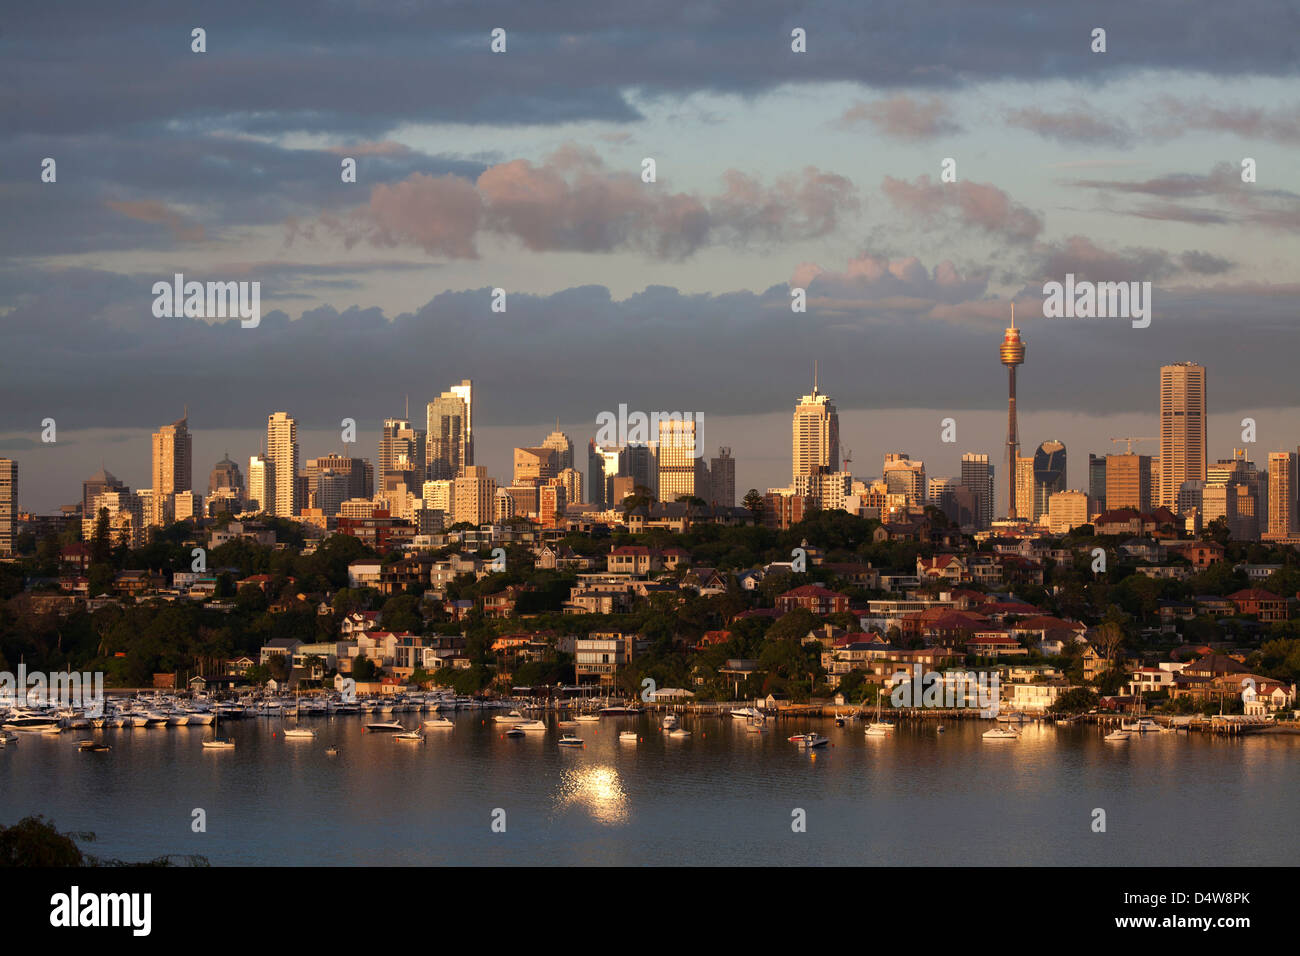 Early morning view of Sydney CBD Skyline with residential Point Piper and Rose Bay in foreground Sydney Australia Stock Photo